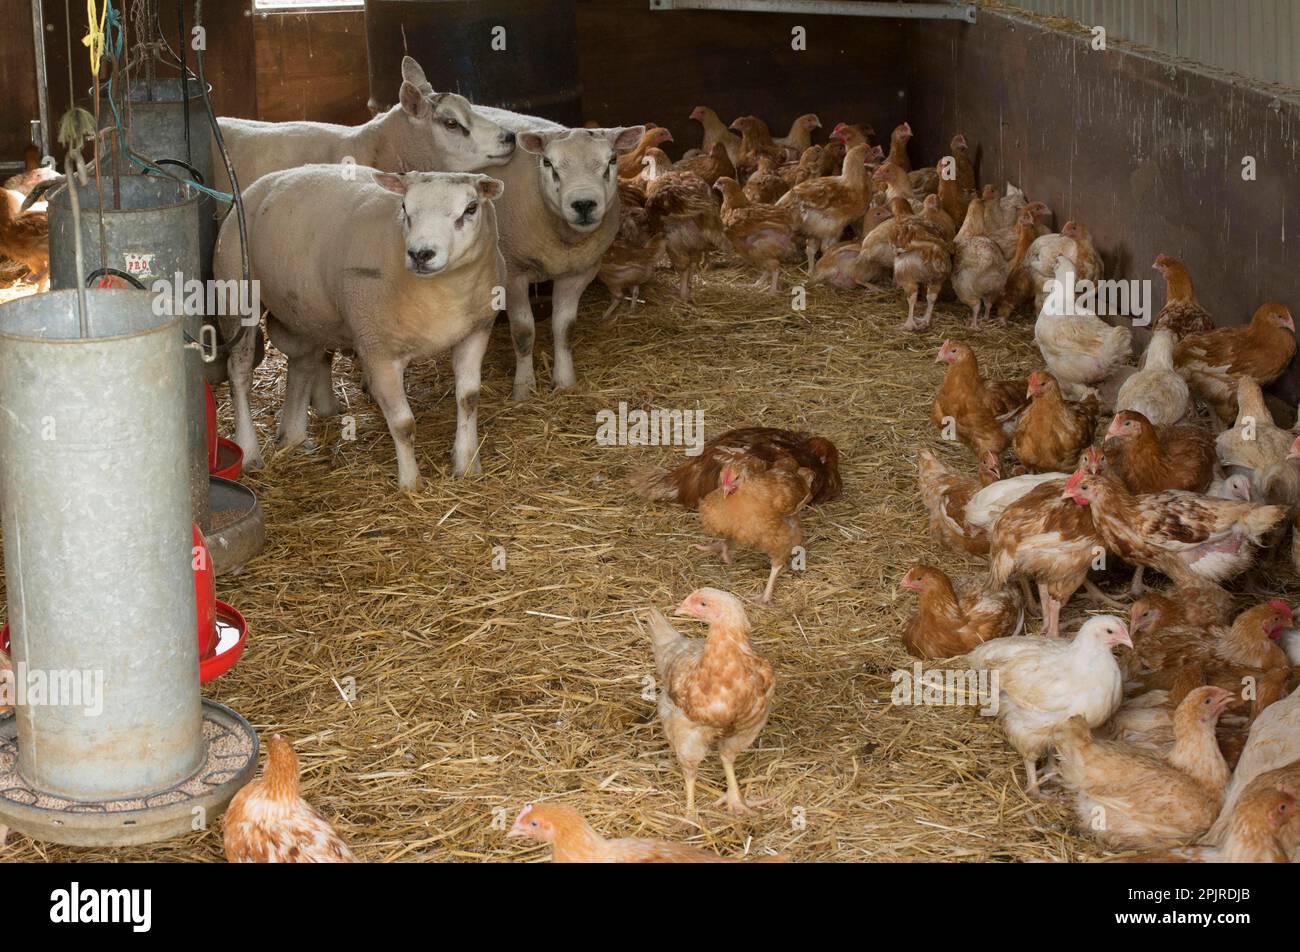 Domestic Sheep, Beltex rams, with Domestic Chicken, freerange broiler flock, on straw bedding beside feeders in shed, Burnley, Lancashire, England Stock Photo